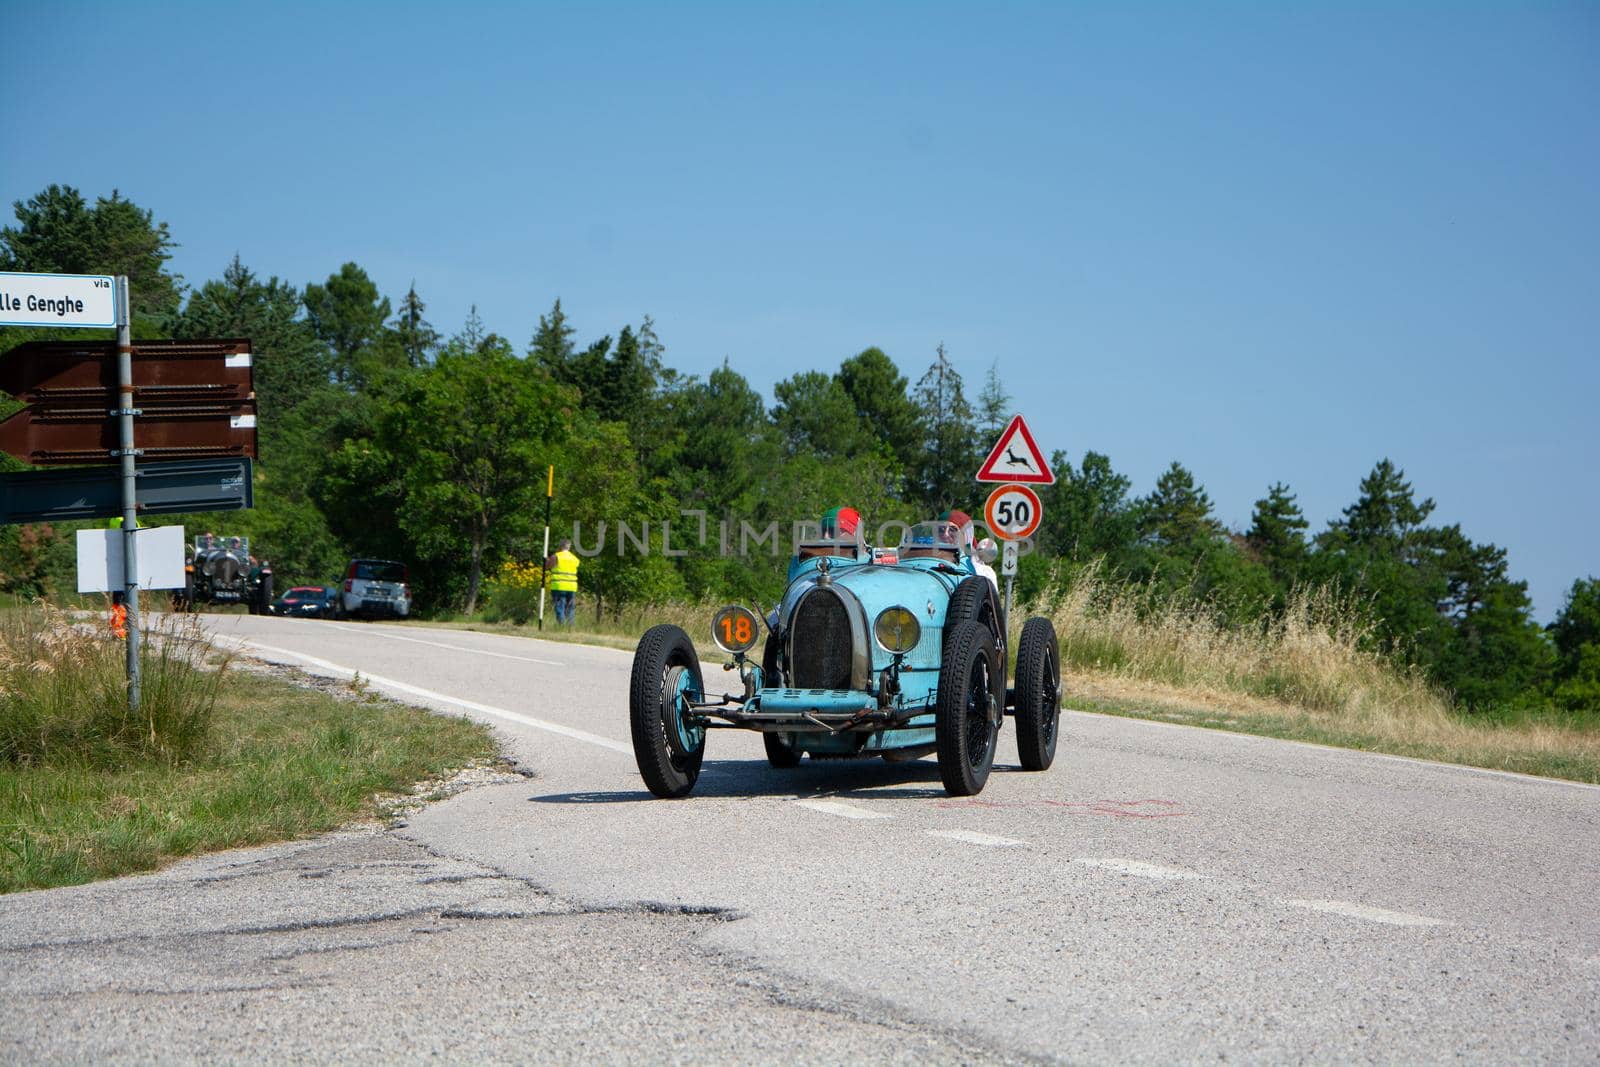 BUGATTI T35 1925 on an old racing car in rally Mille Miglia 2022 the famous italian historical race (1927-1957 by massimocampanari